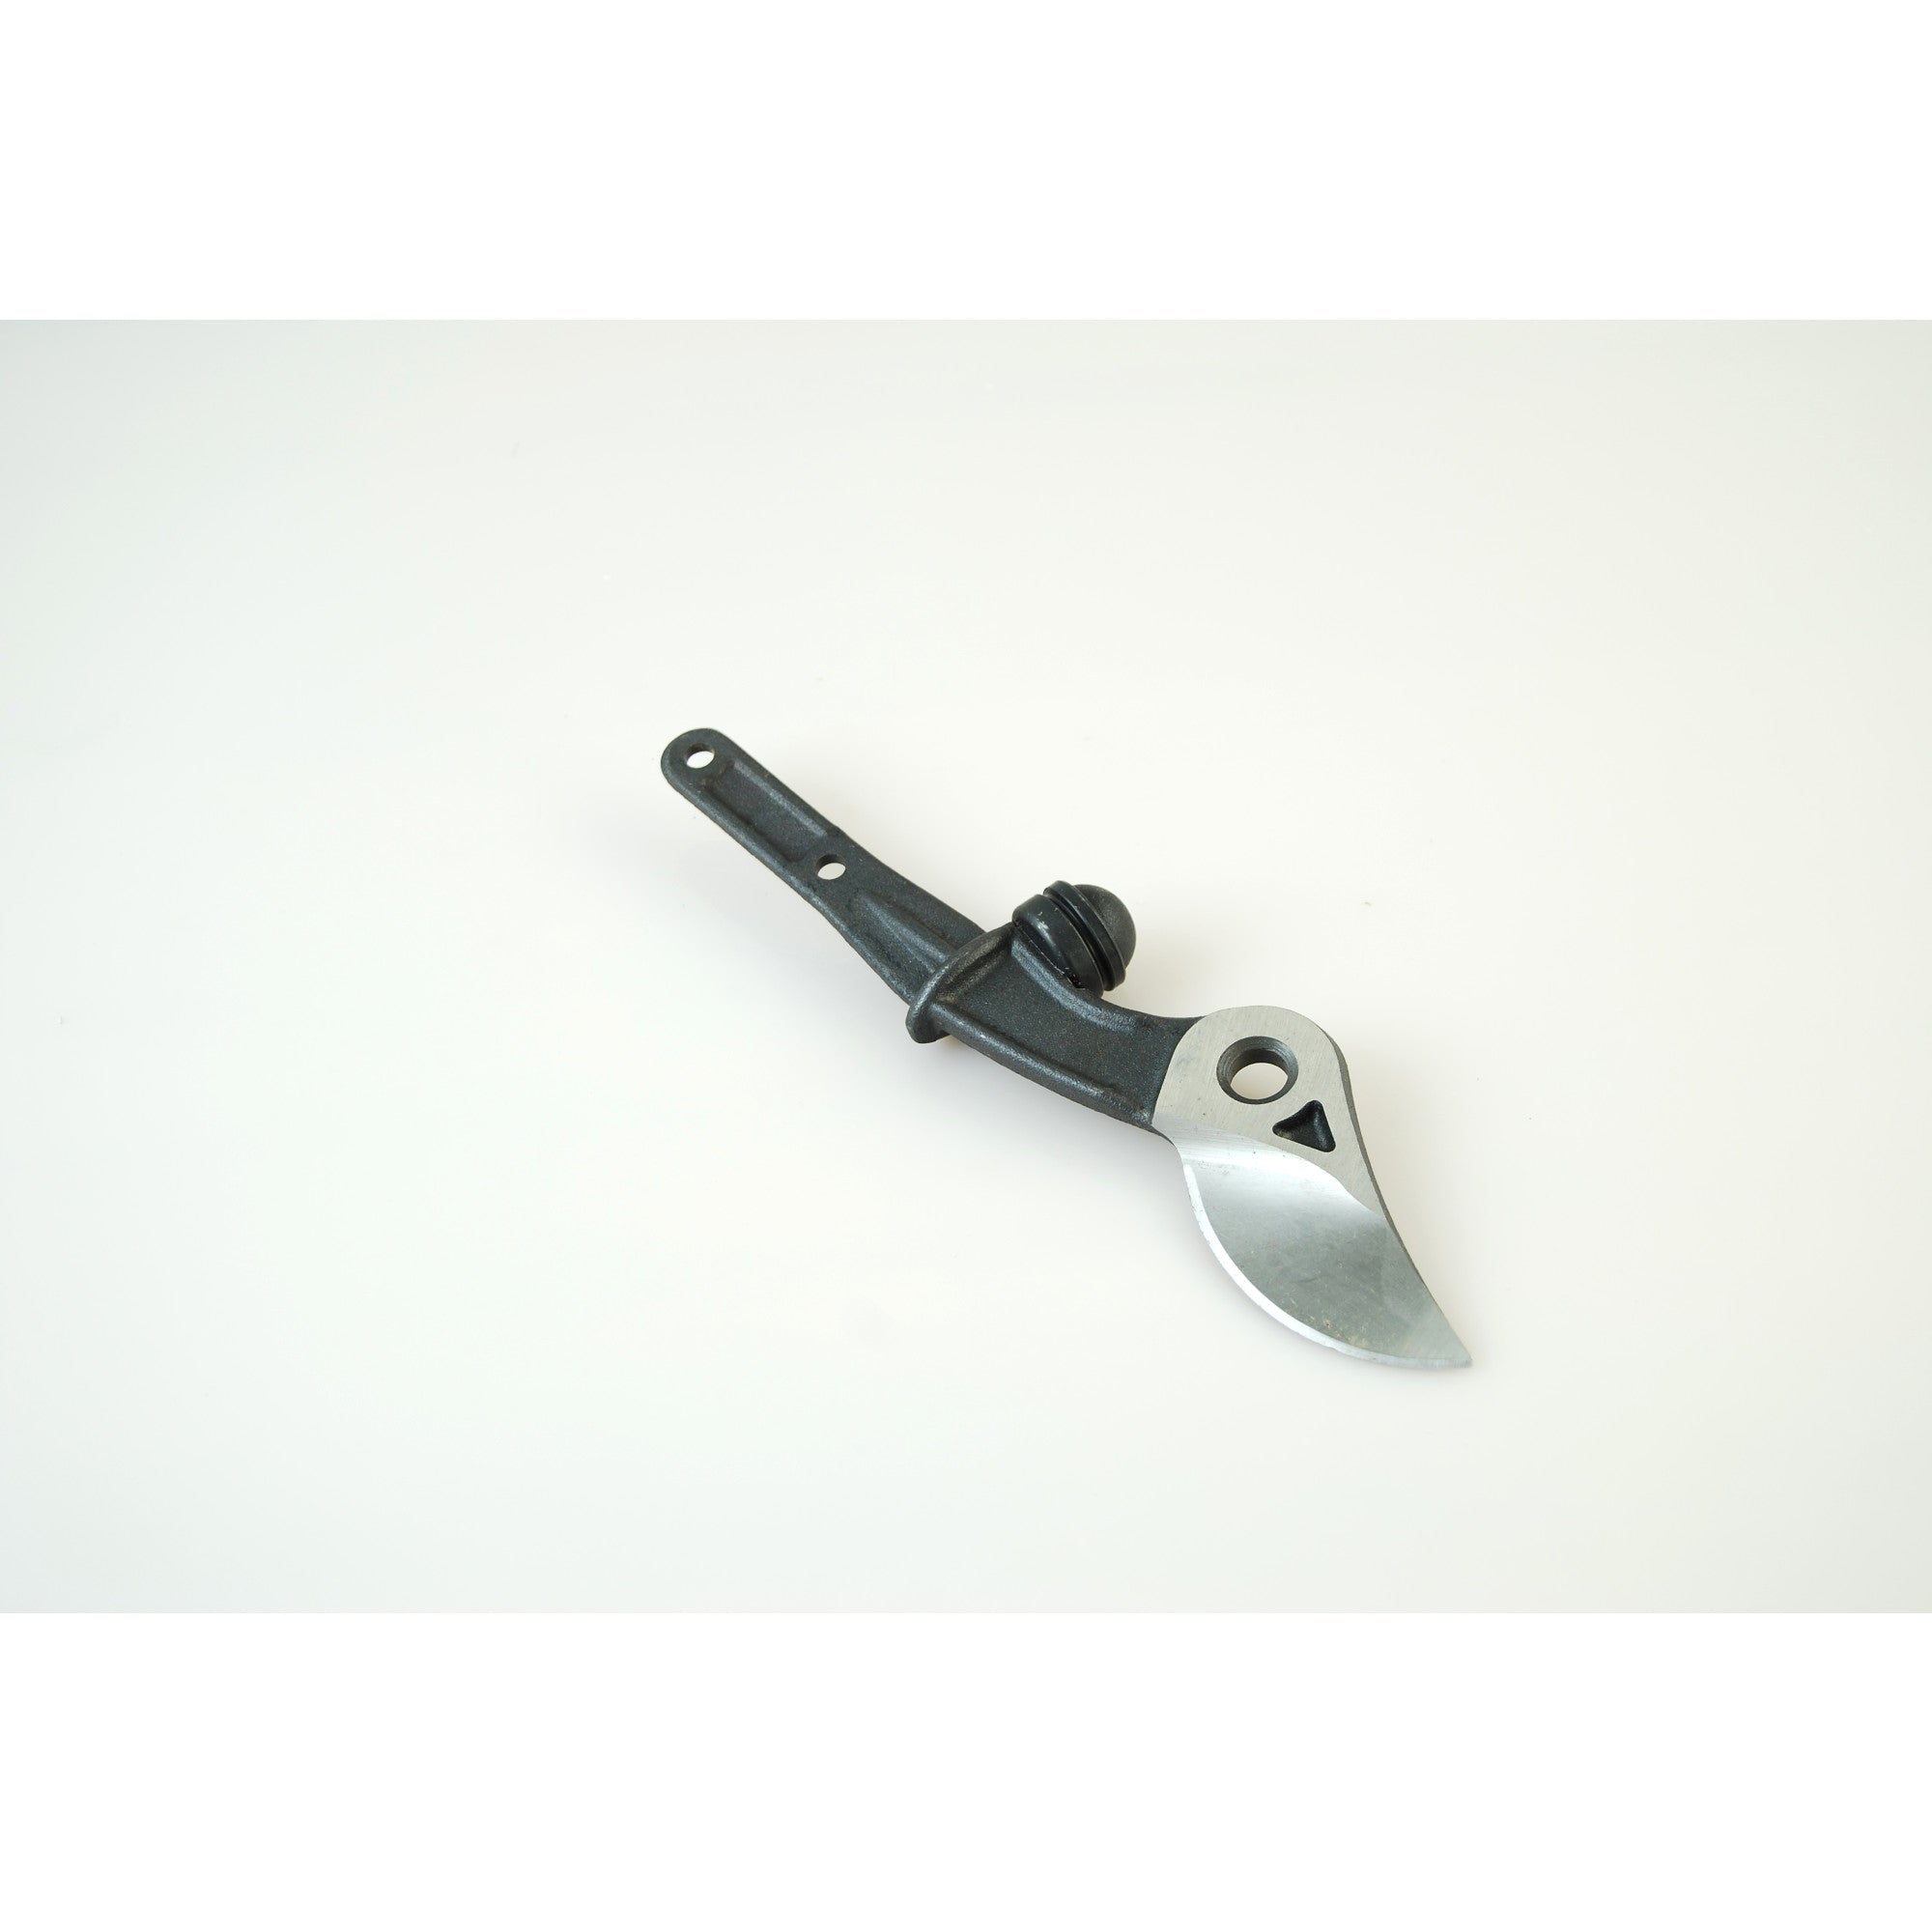 Replacement Blade for Vine Loppers